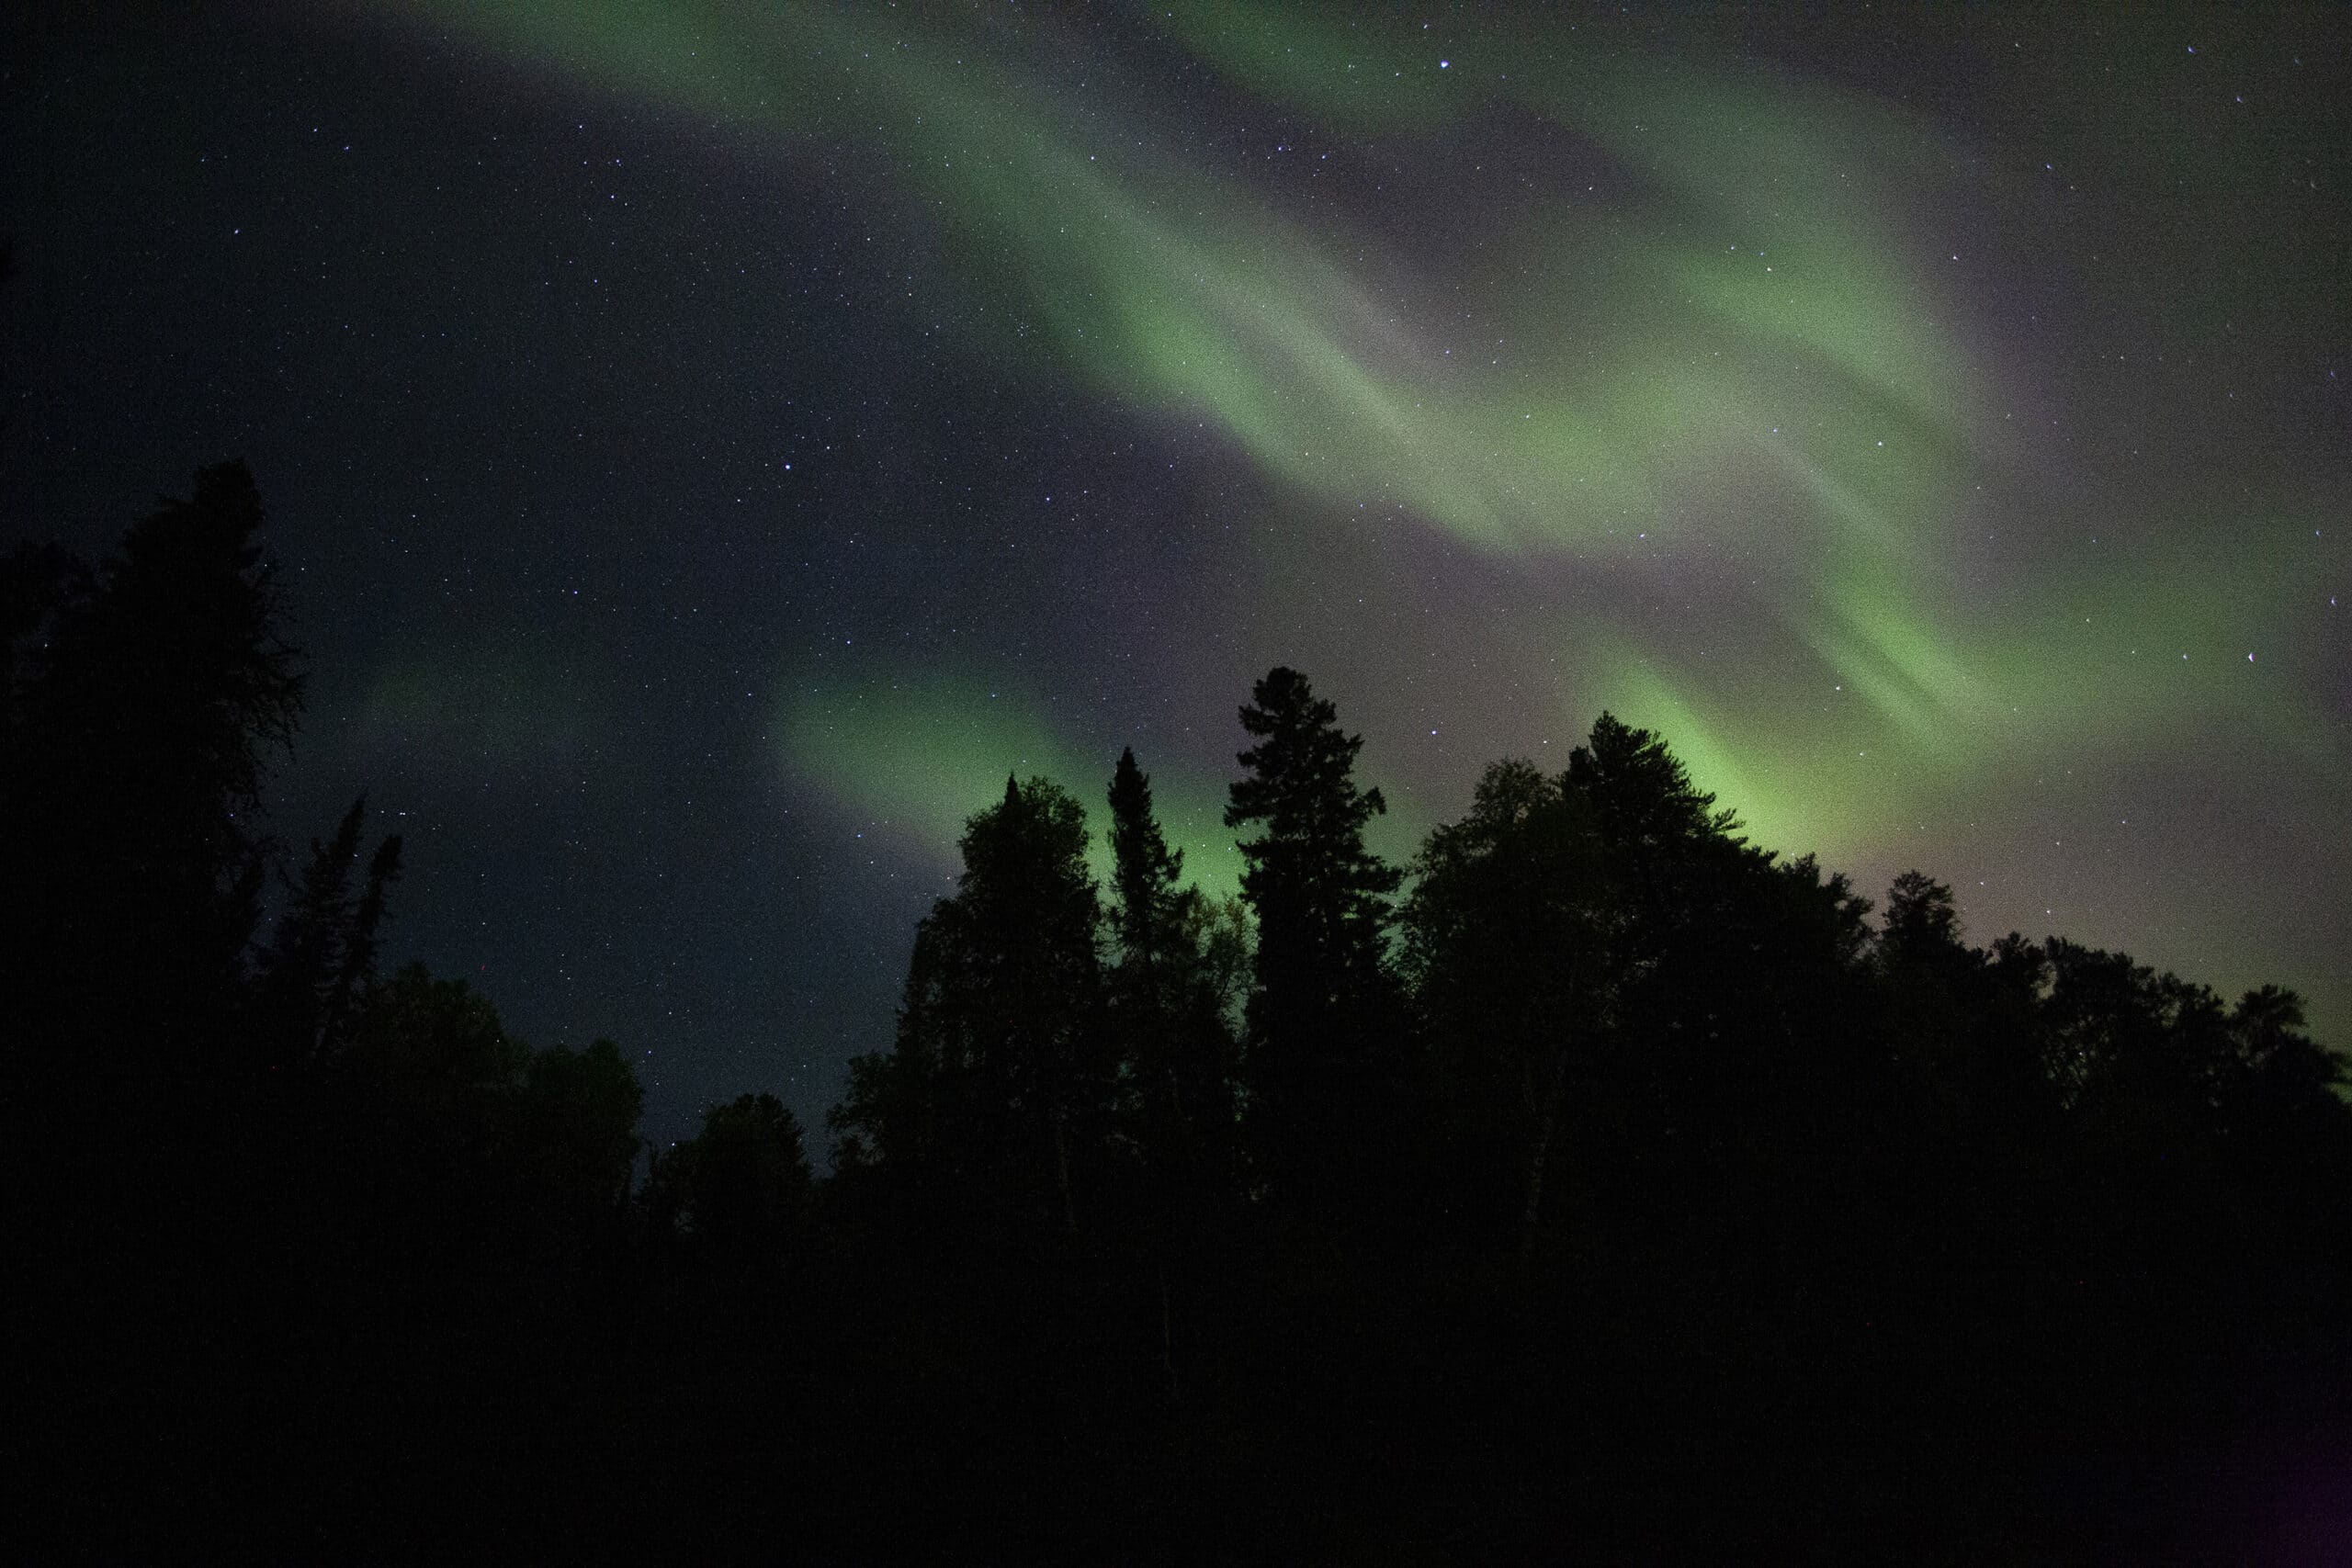 Purple and green aurora borealis over a silhouette of trees.